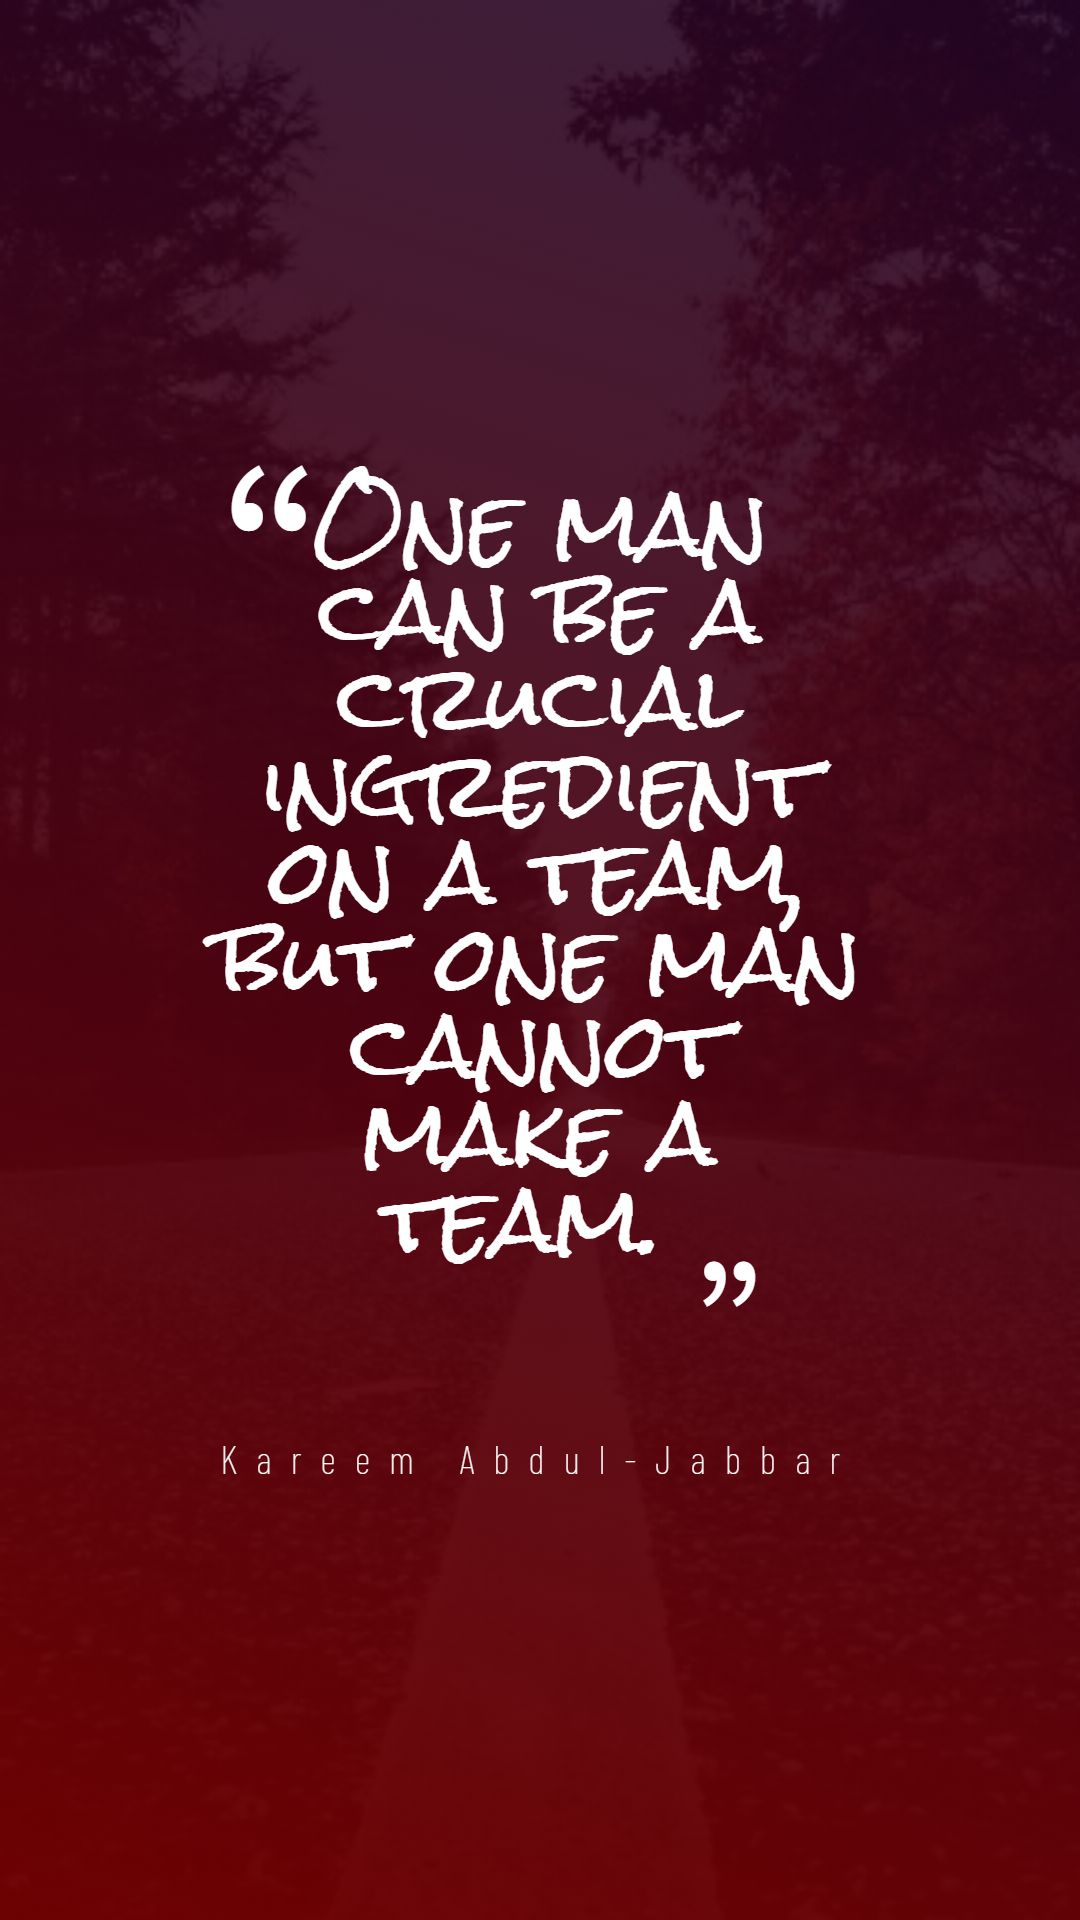 One man can be a crucial ingredient on a team but one man cannot make a team.